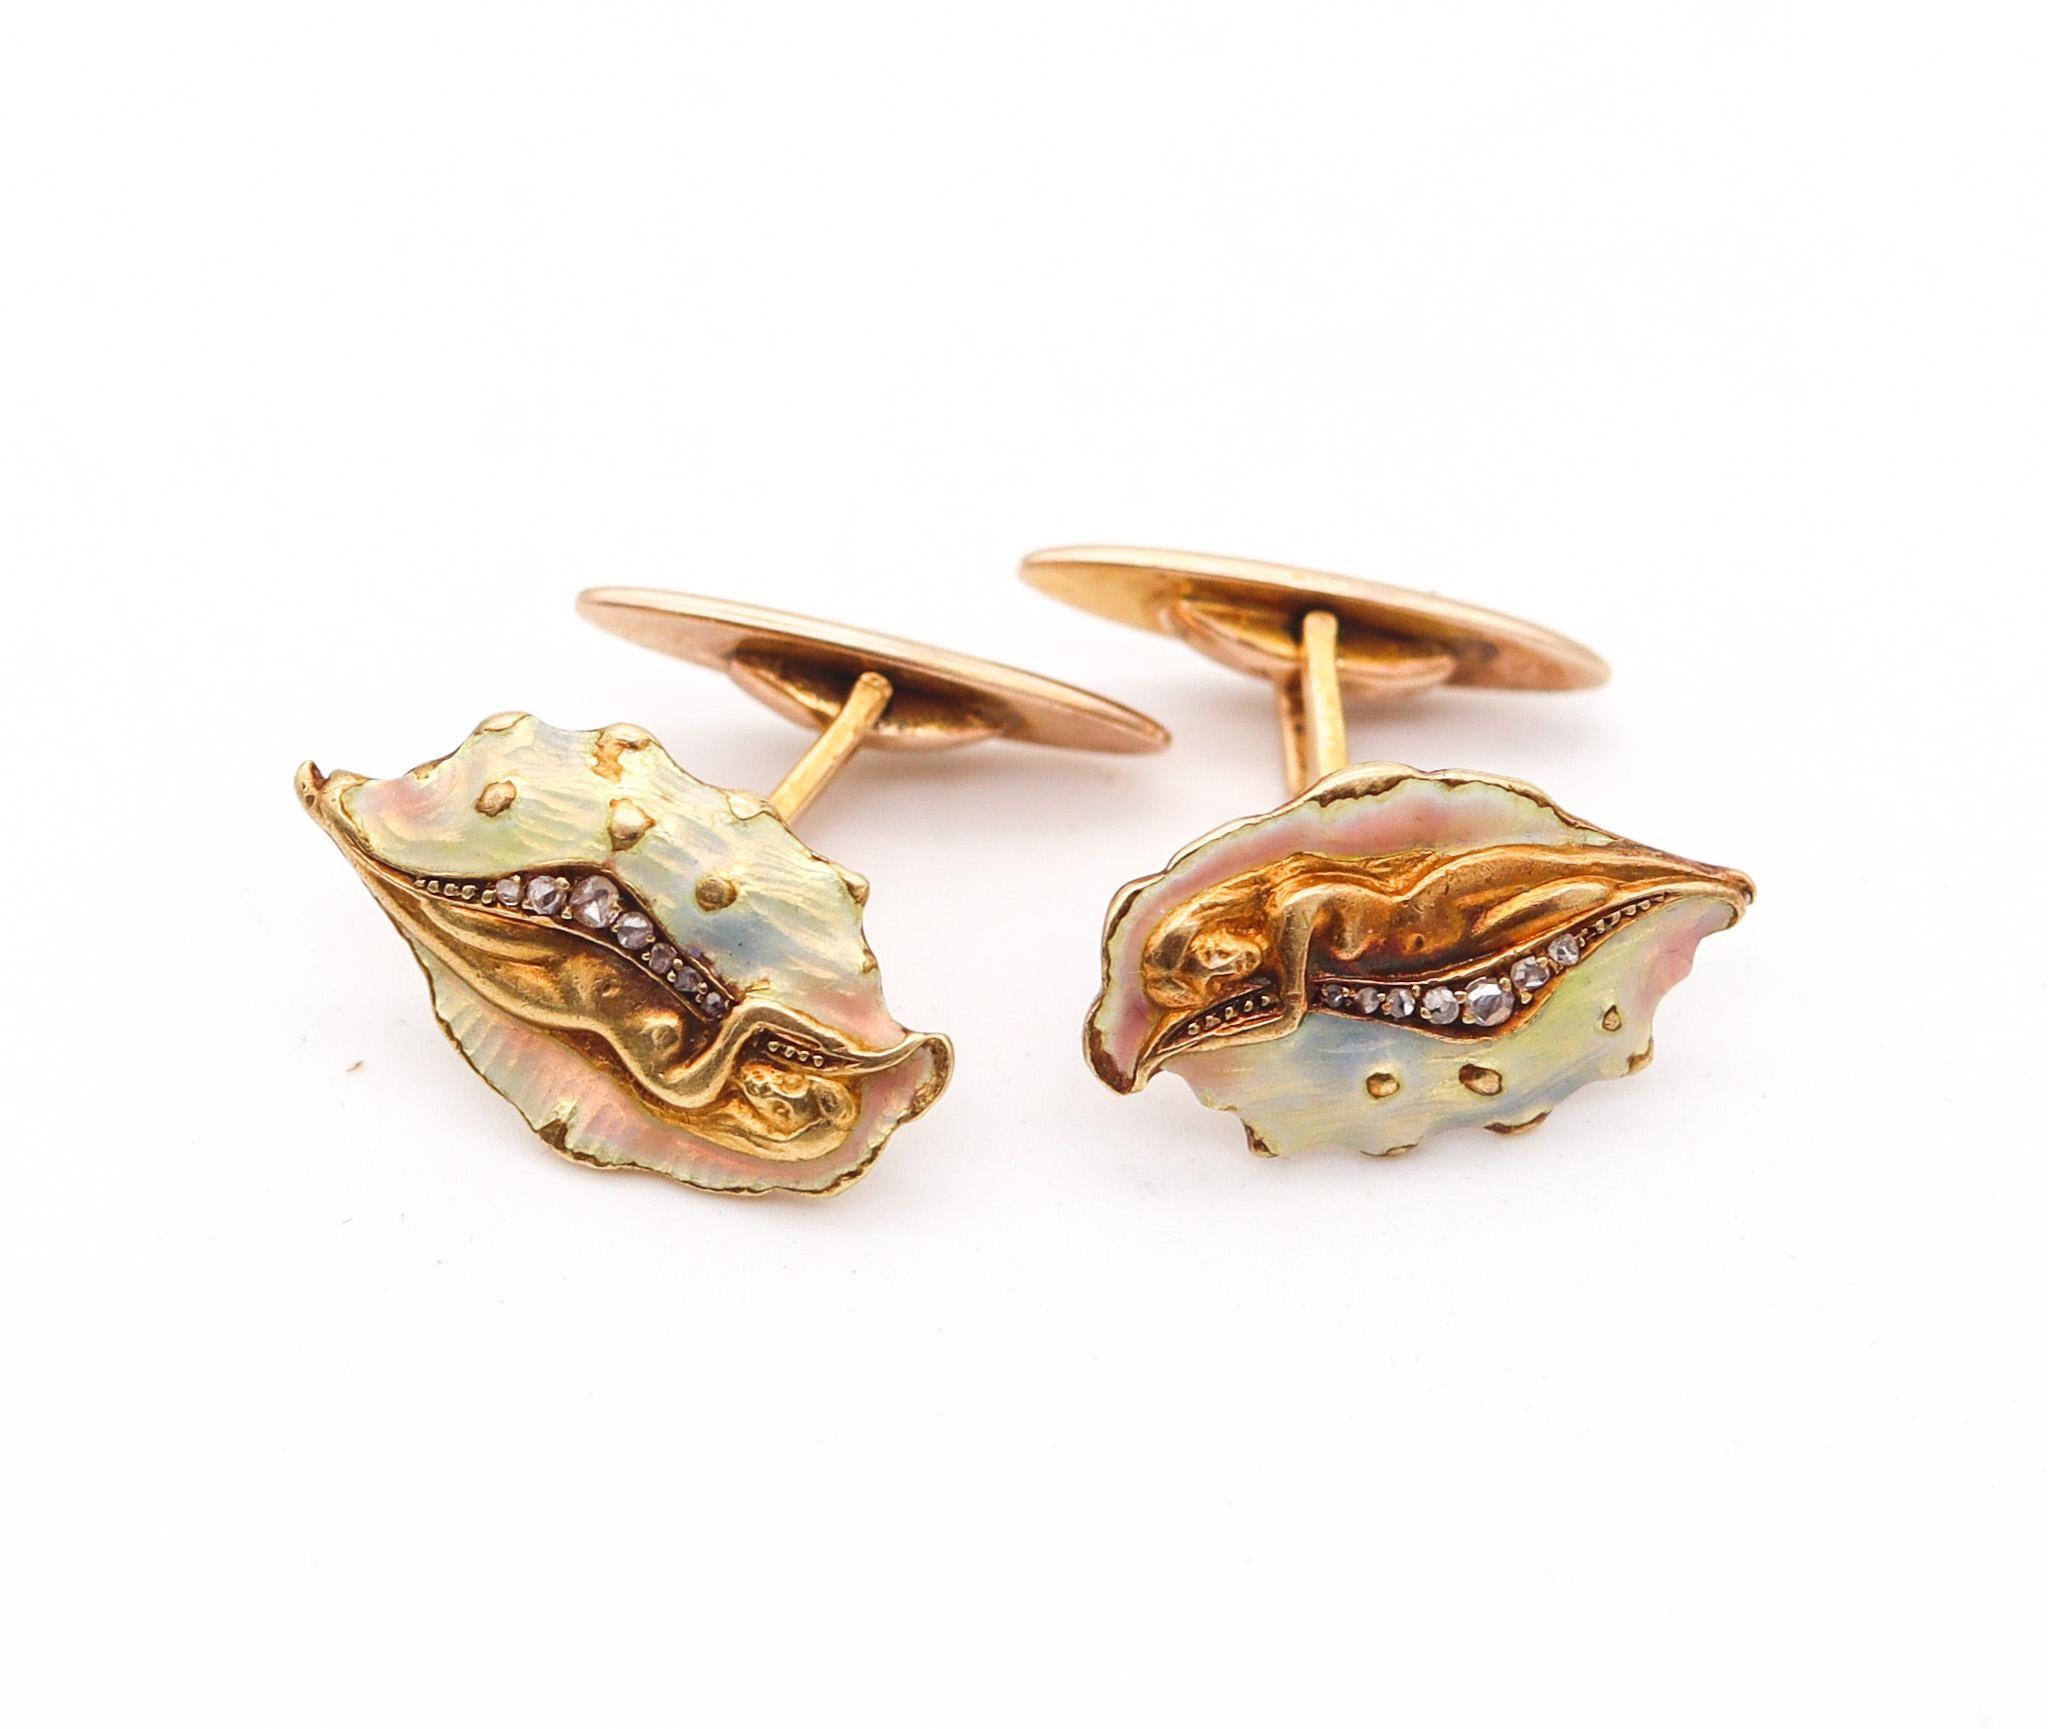 Art nouveau pair of cufflinks made in Germany.

An outstanding pair of antique cufflinks made in Germany during the Art Nouveau period, back in the 1900. These cufflinks have been crafted with free shapes in solid yellow gold of 18 karats. The